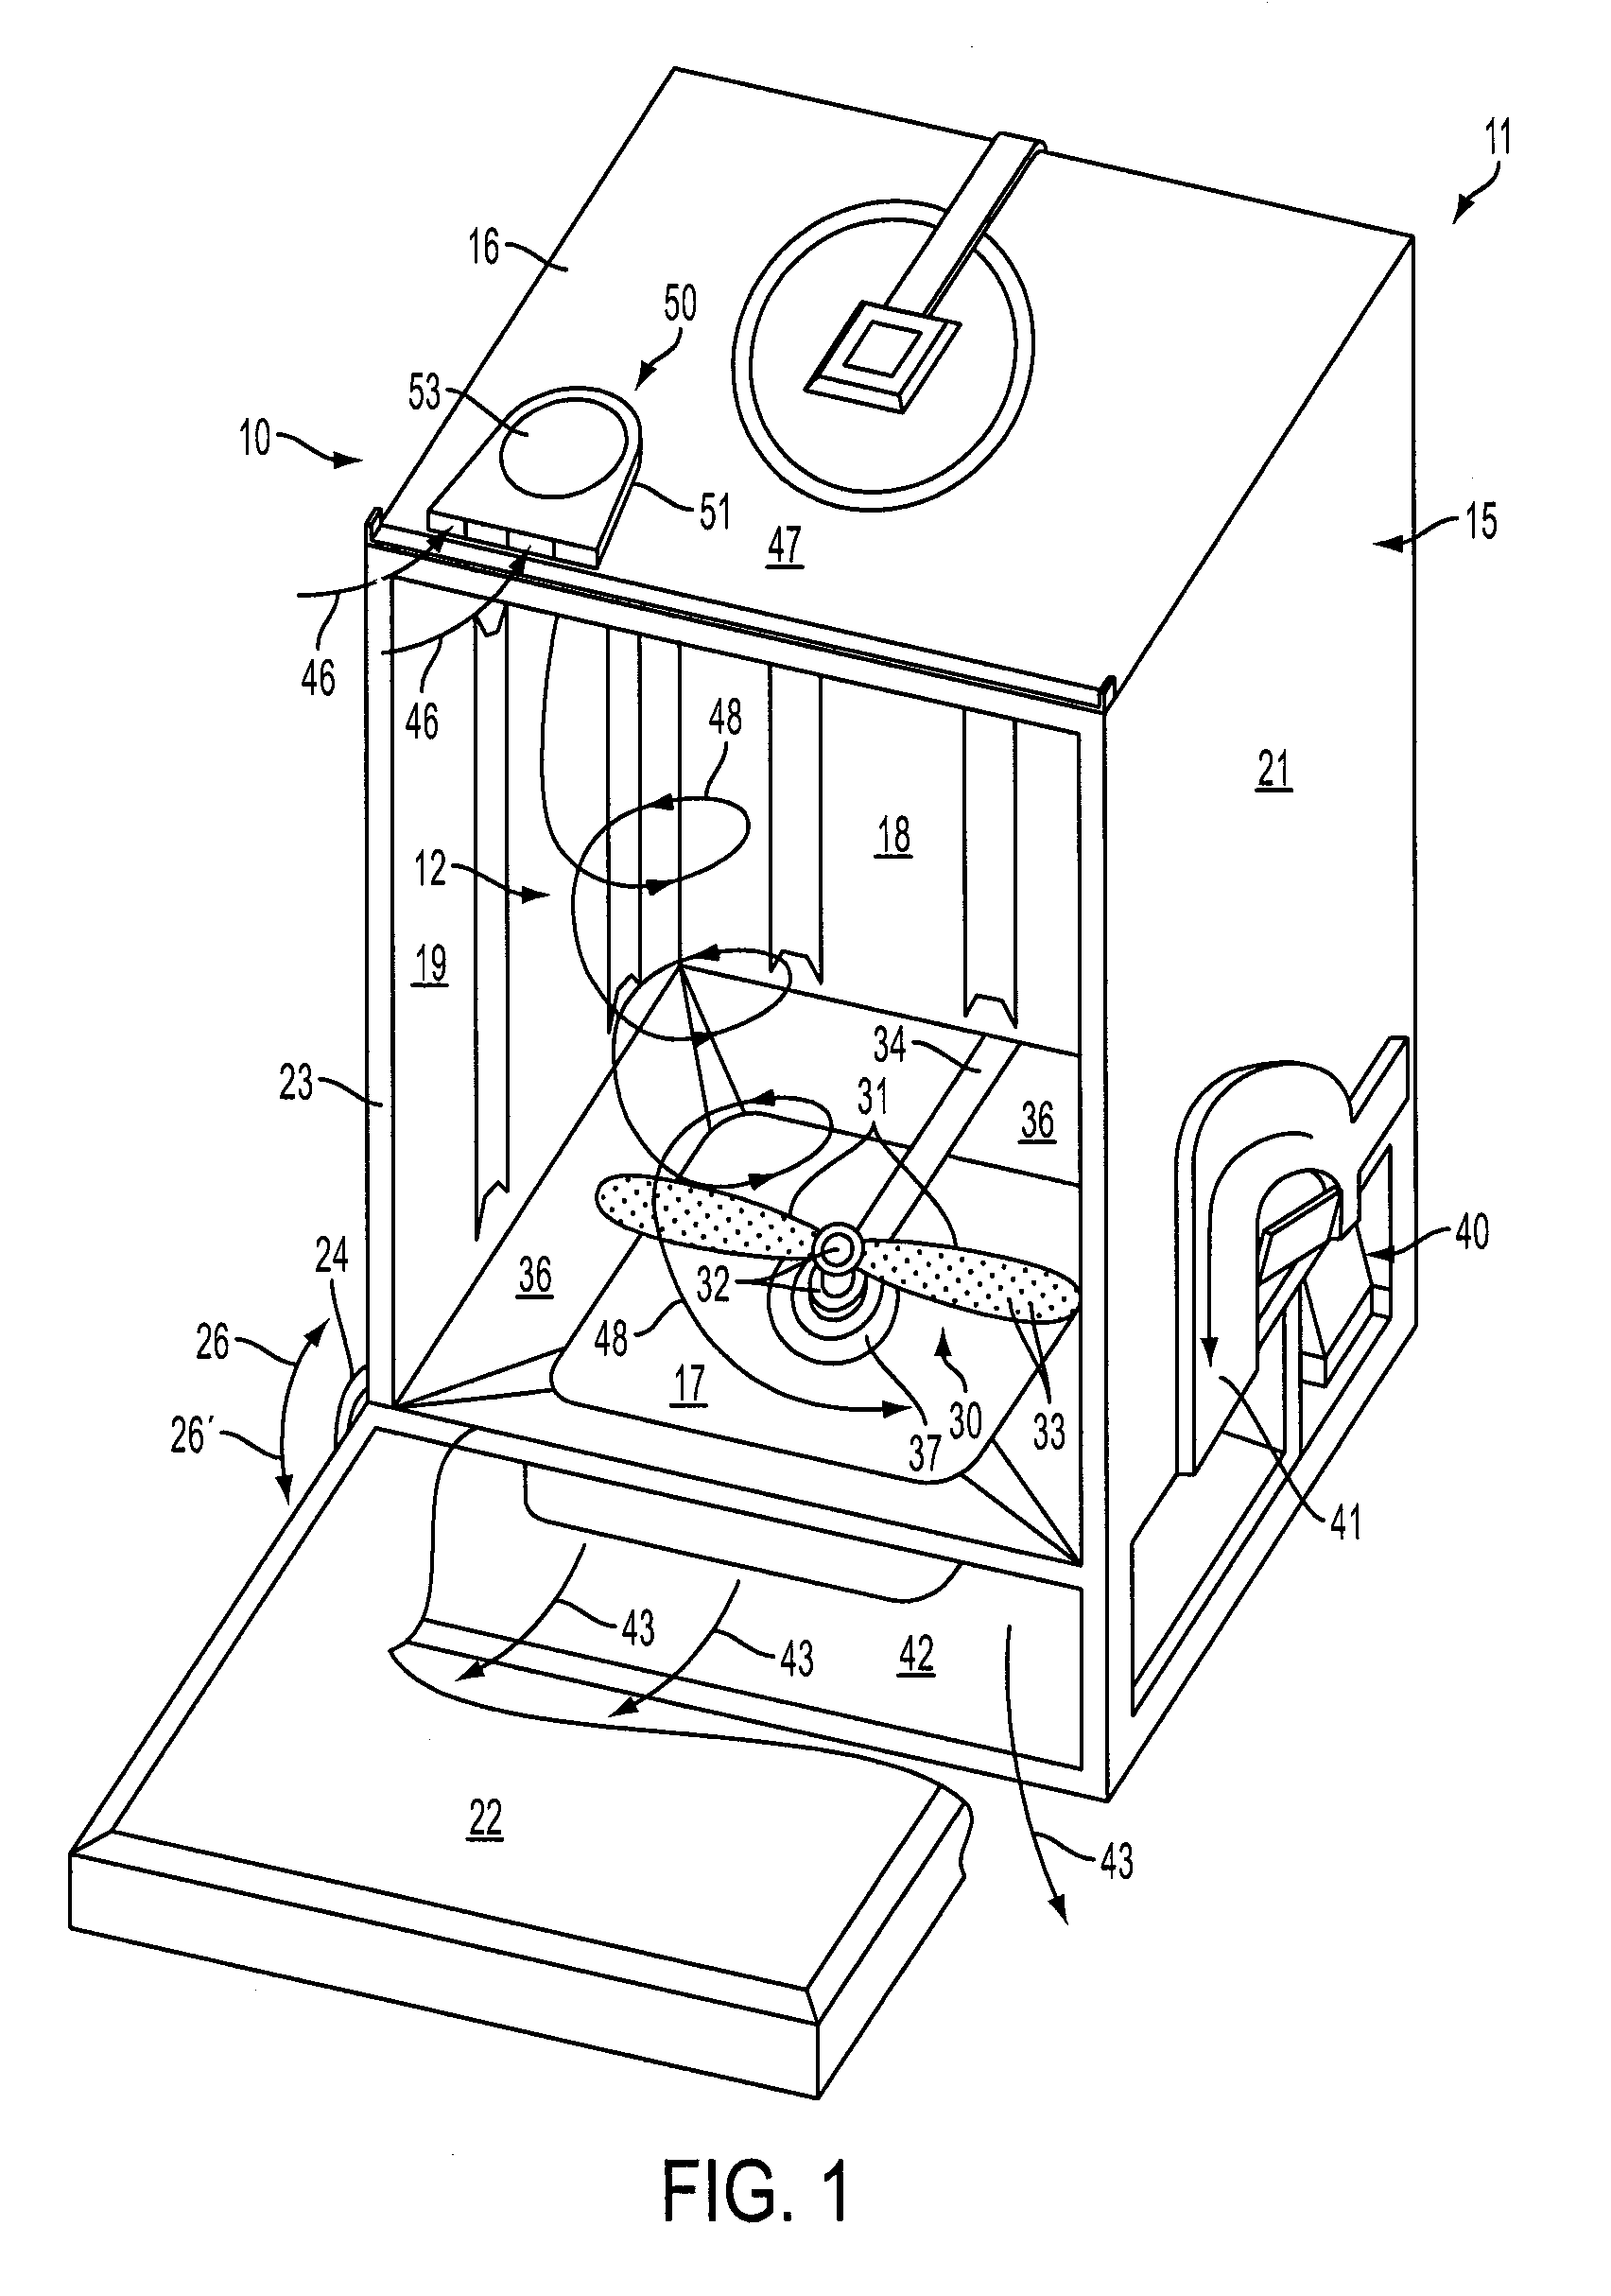 Drying system for a dishwasher